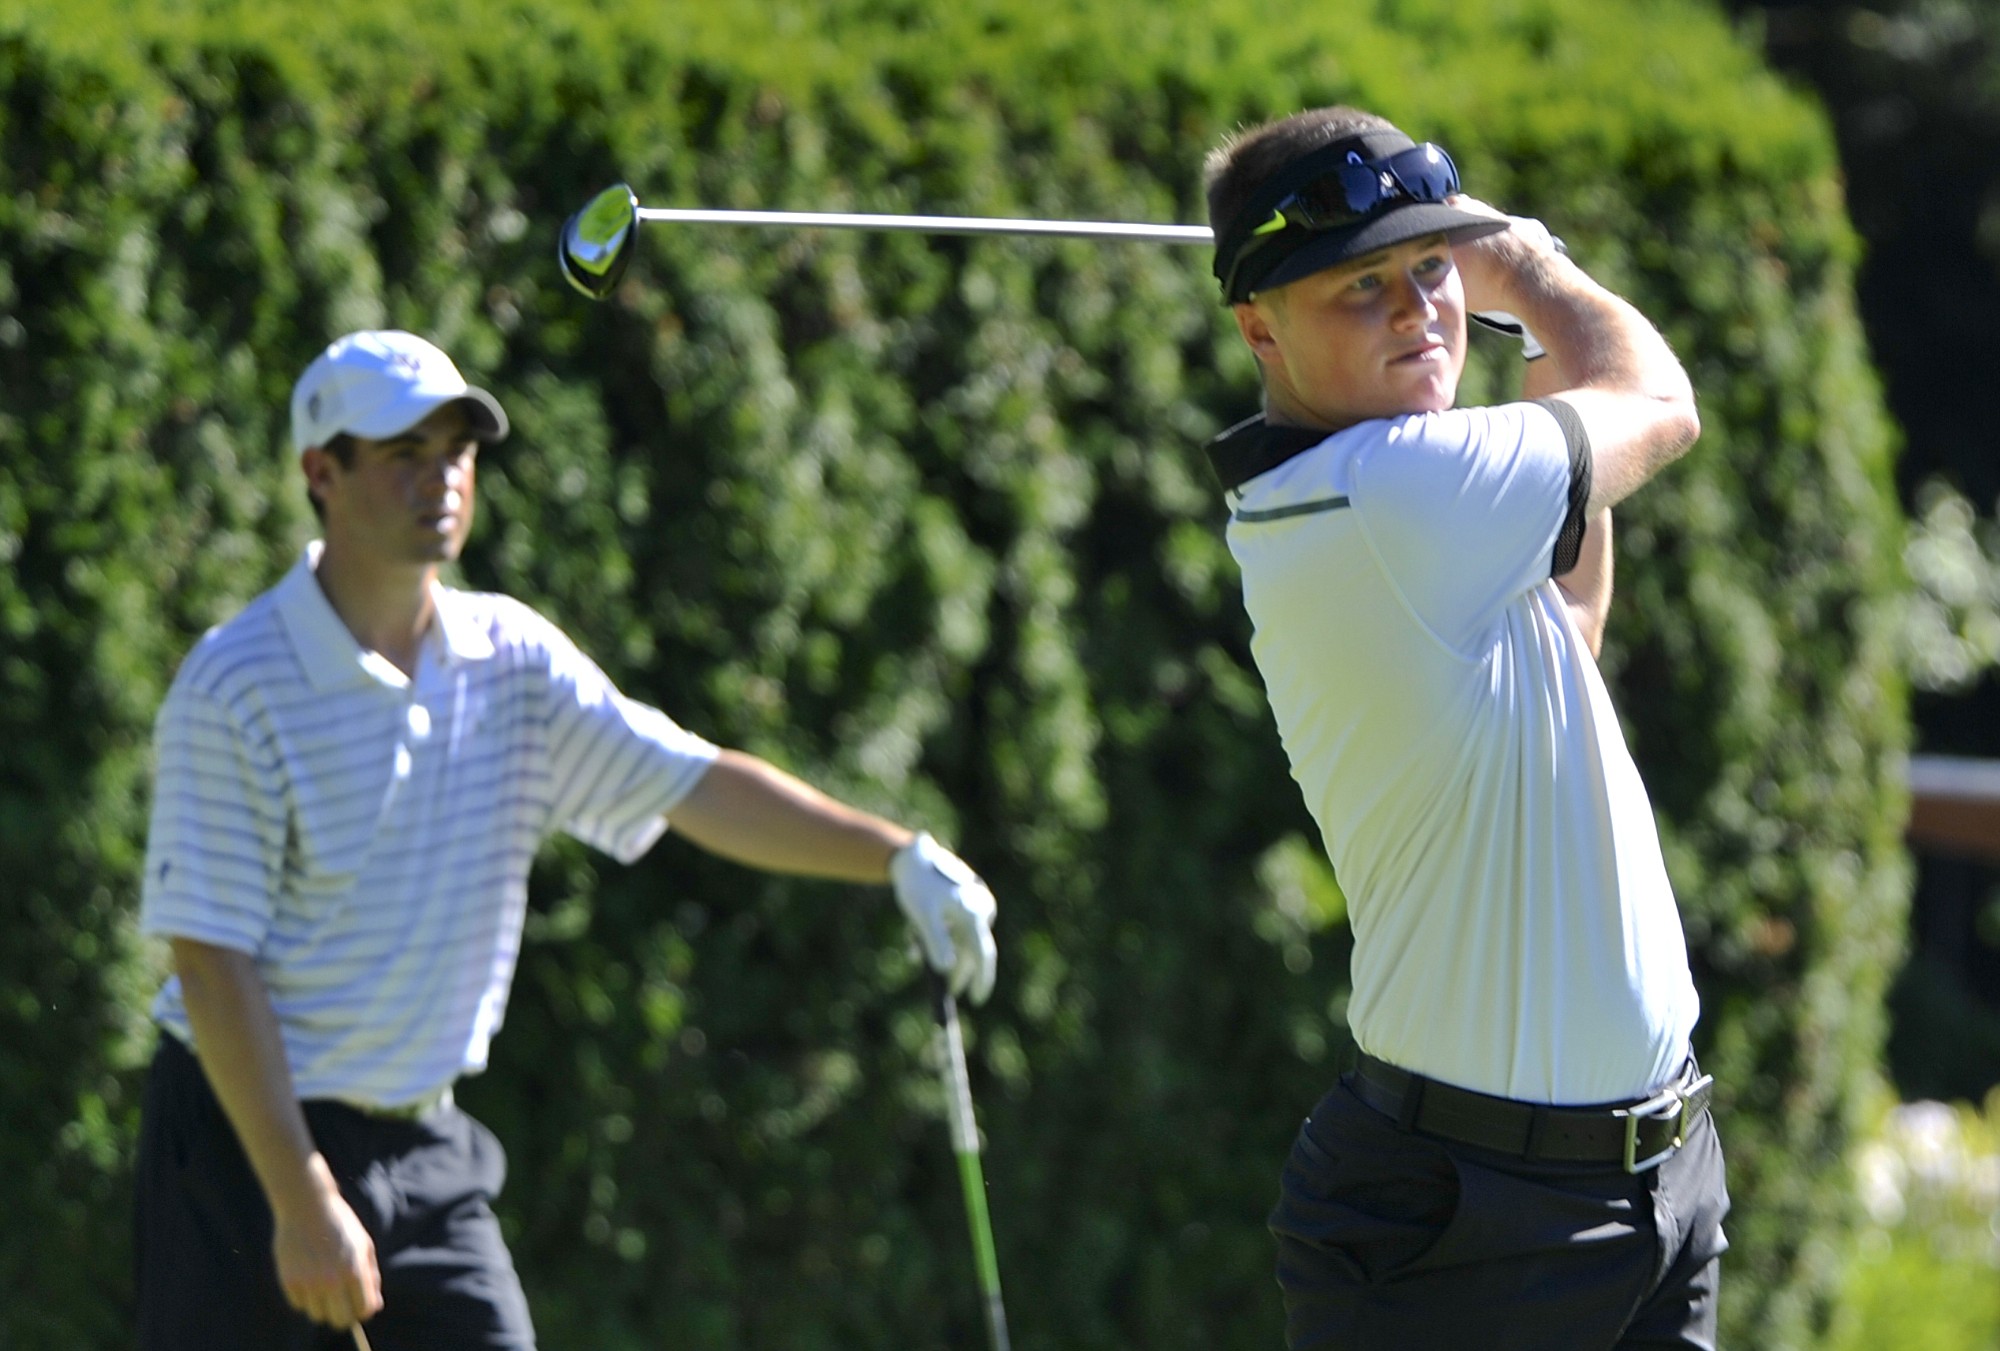 Nigel Lett, right, rebounded from back-to-back double bogeys to record pars on the final three holes and win the Royal Oaks Invitational Tournament.